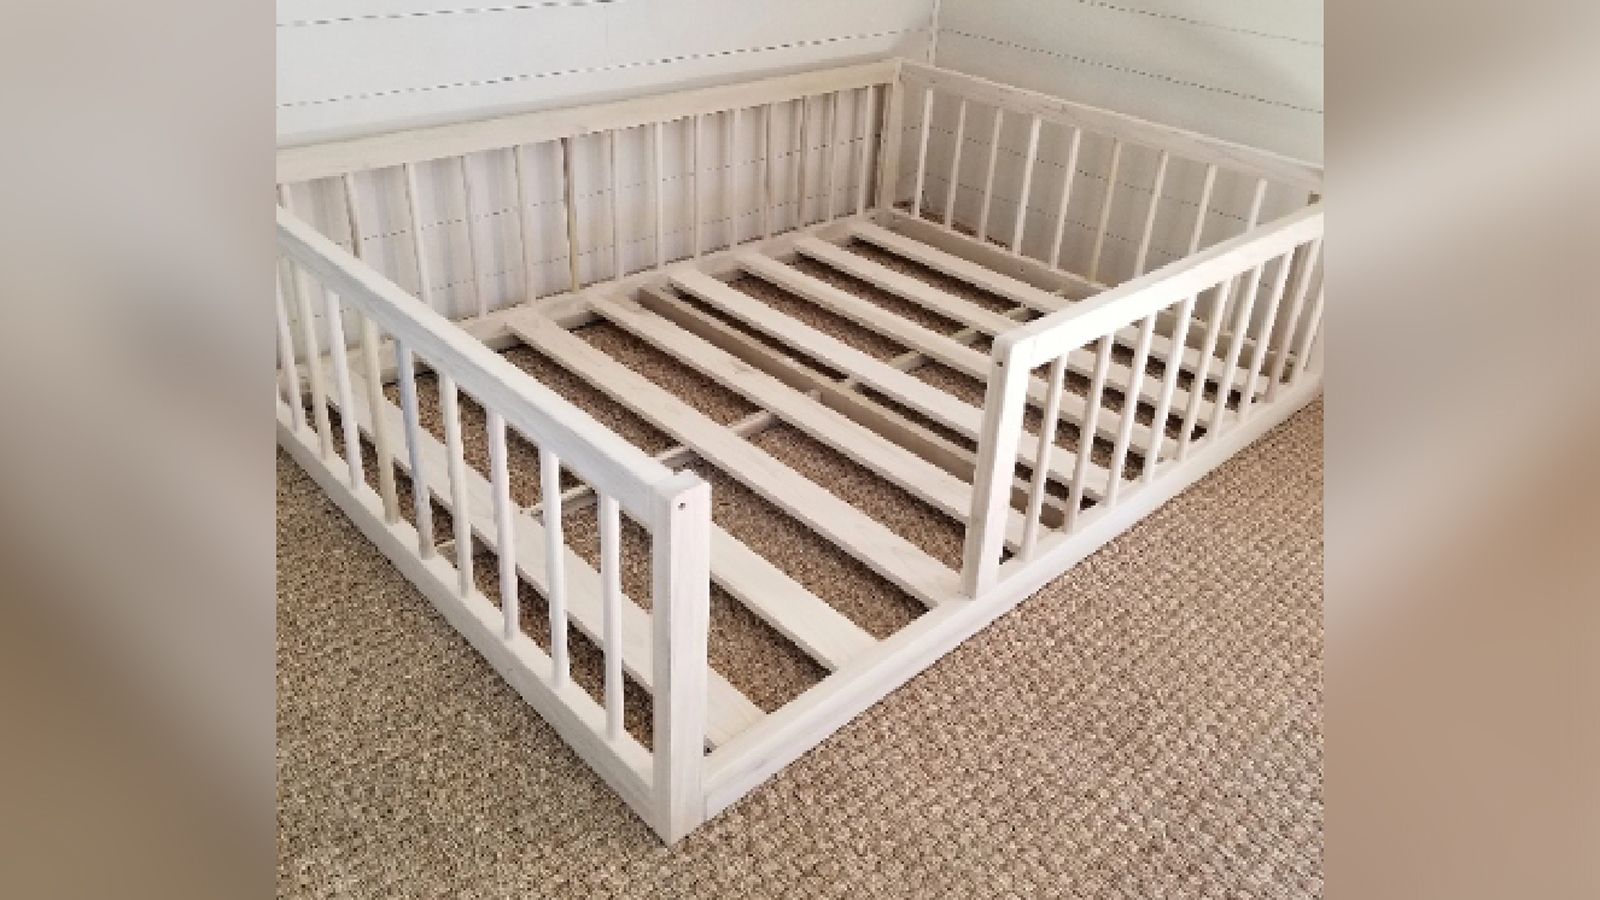 These children's beds are being recalled due to strangulation and death  risks, consumer watchdog says